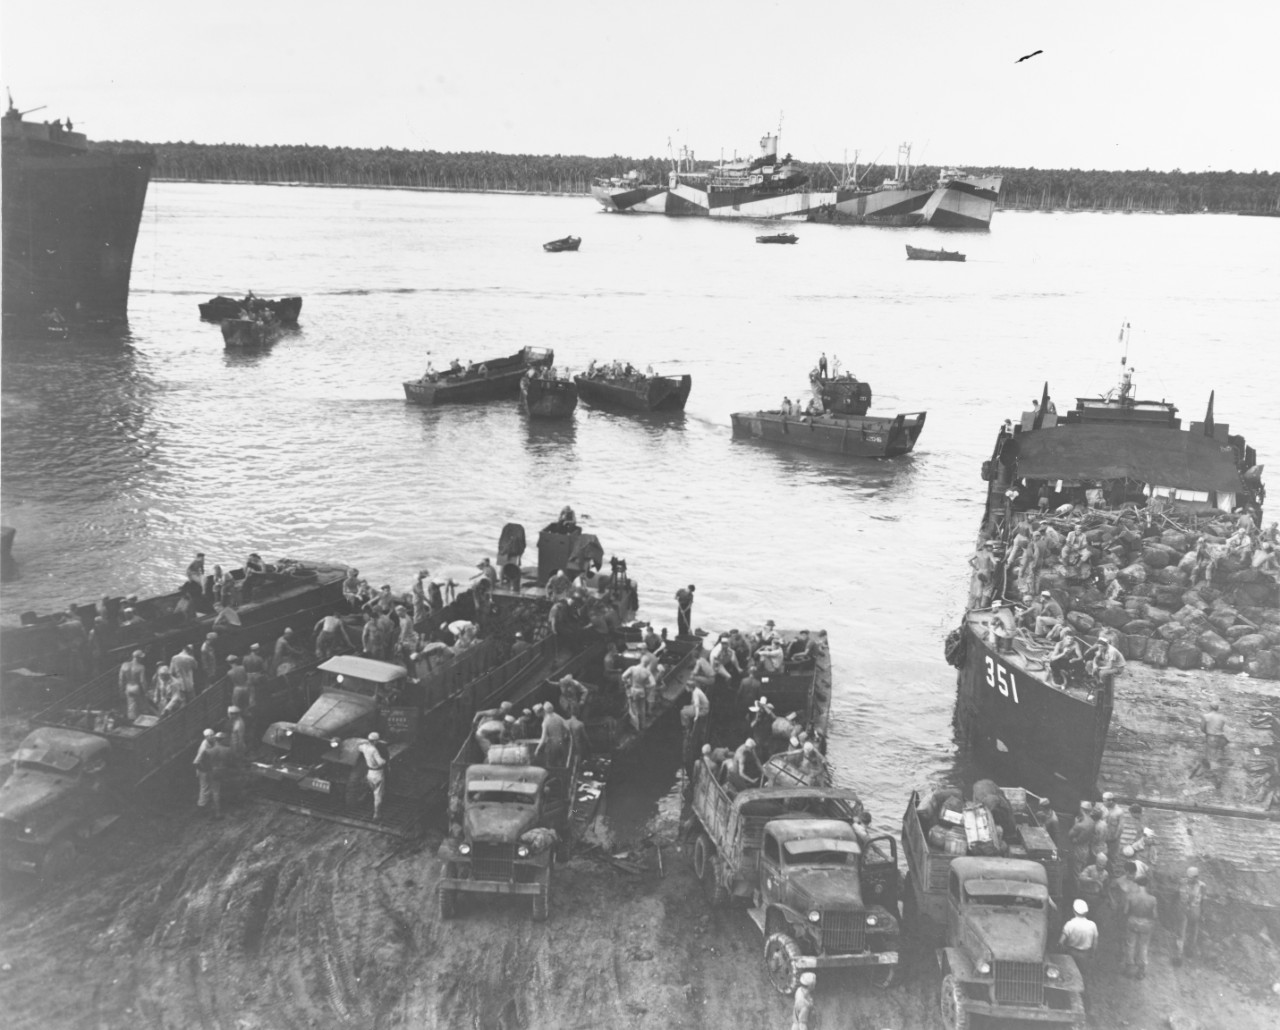 Marines unload their gear, Pavuvu, Russell Islands, May 1944